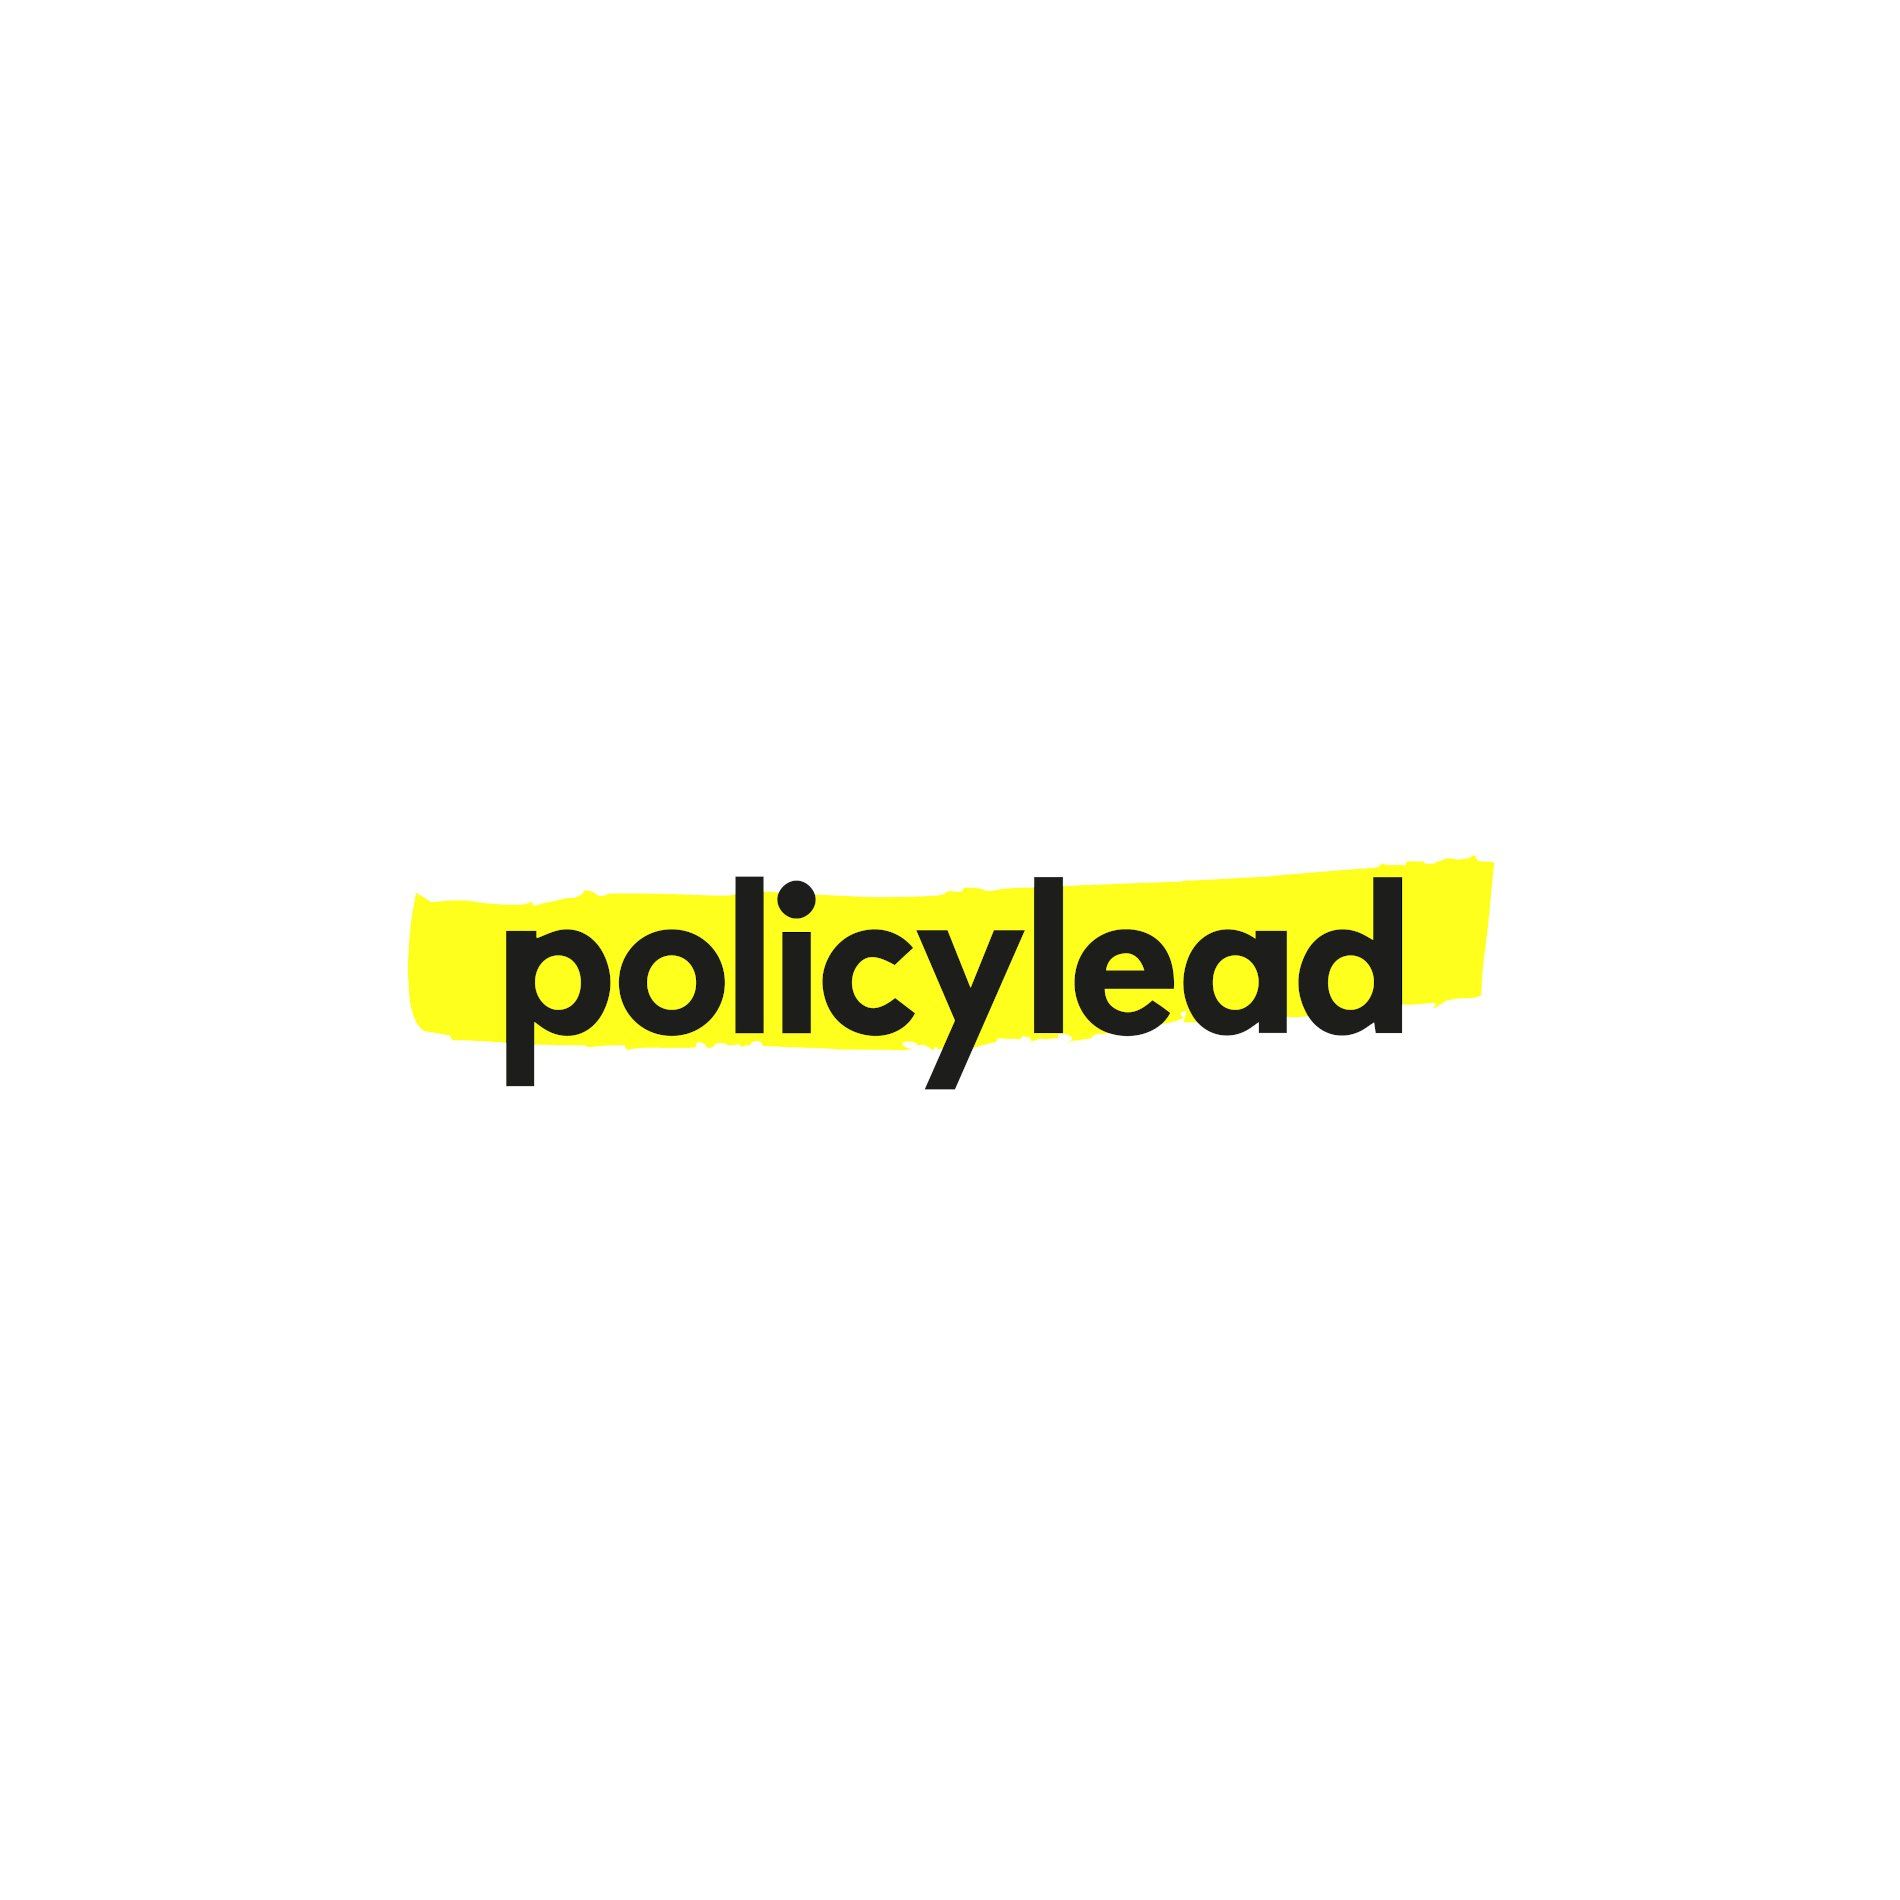 Policylead